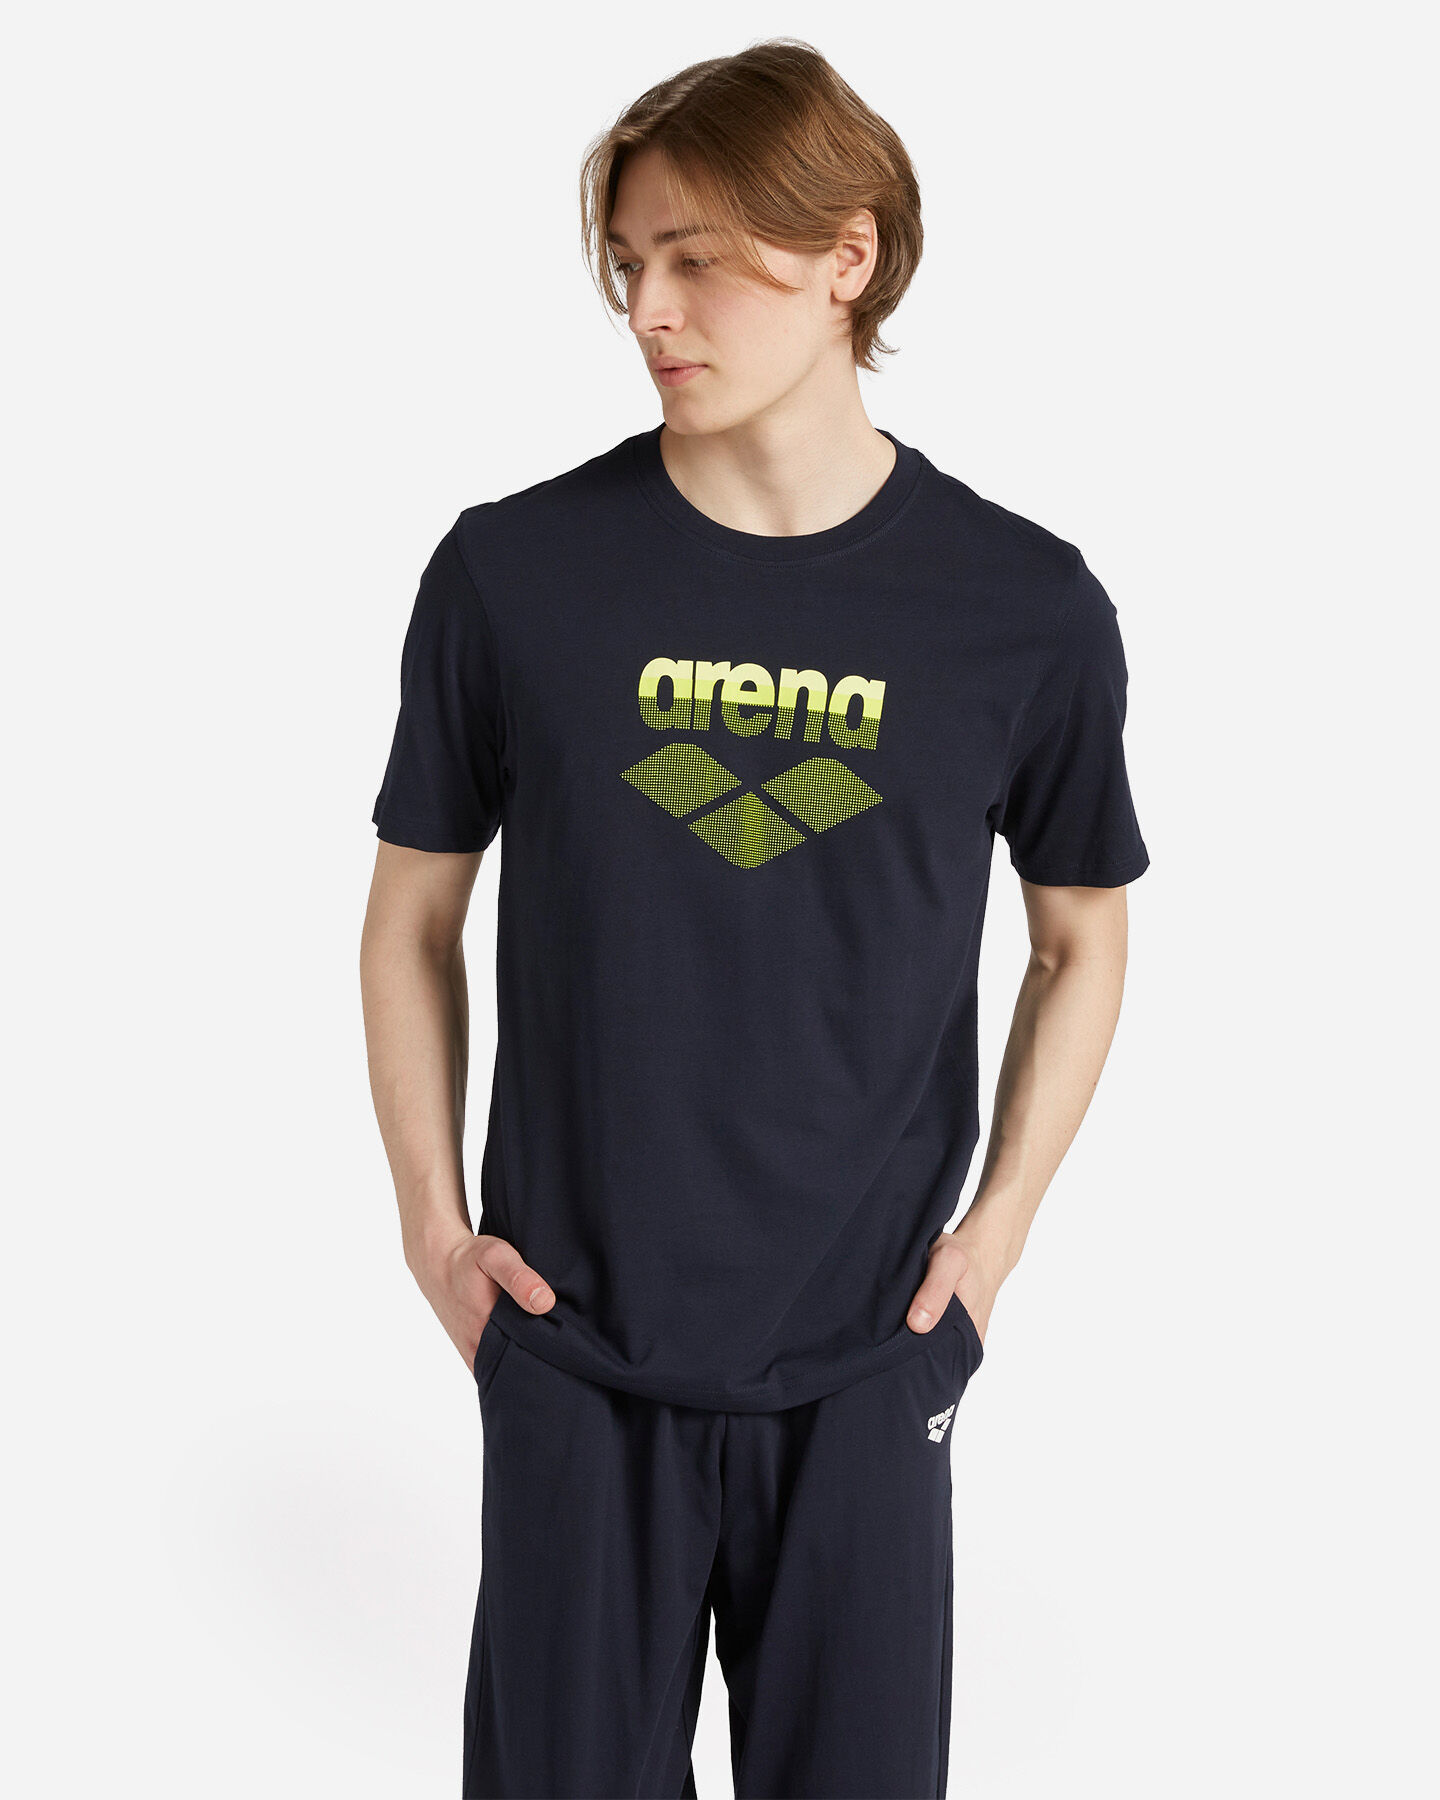  T-Shirt ARENA ATHLETIC M S4118134|914|S scatto 0